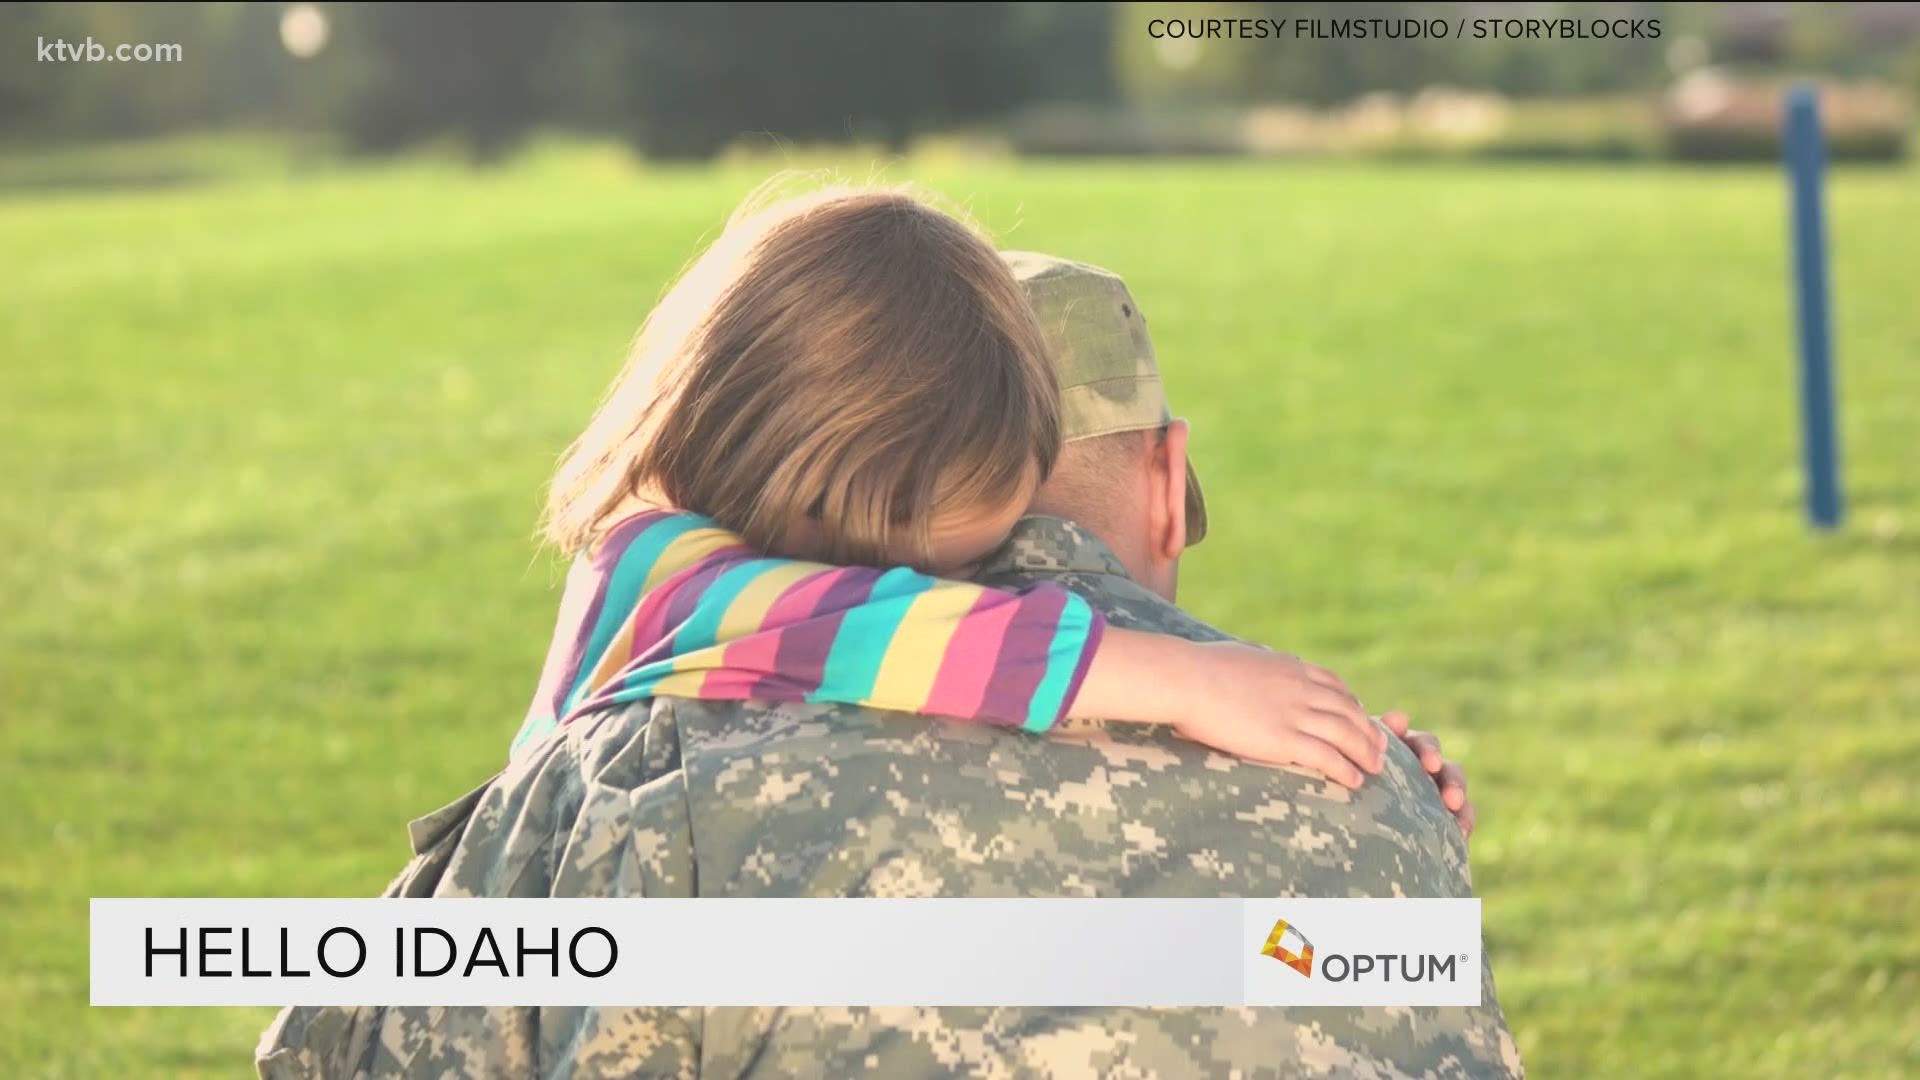 A leading expert on suicide talks about the importance of checking on your loved ones, especially veterans who may be struggling.